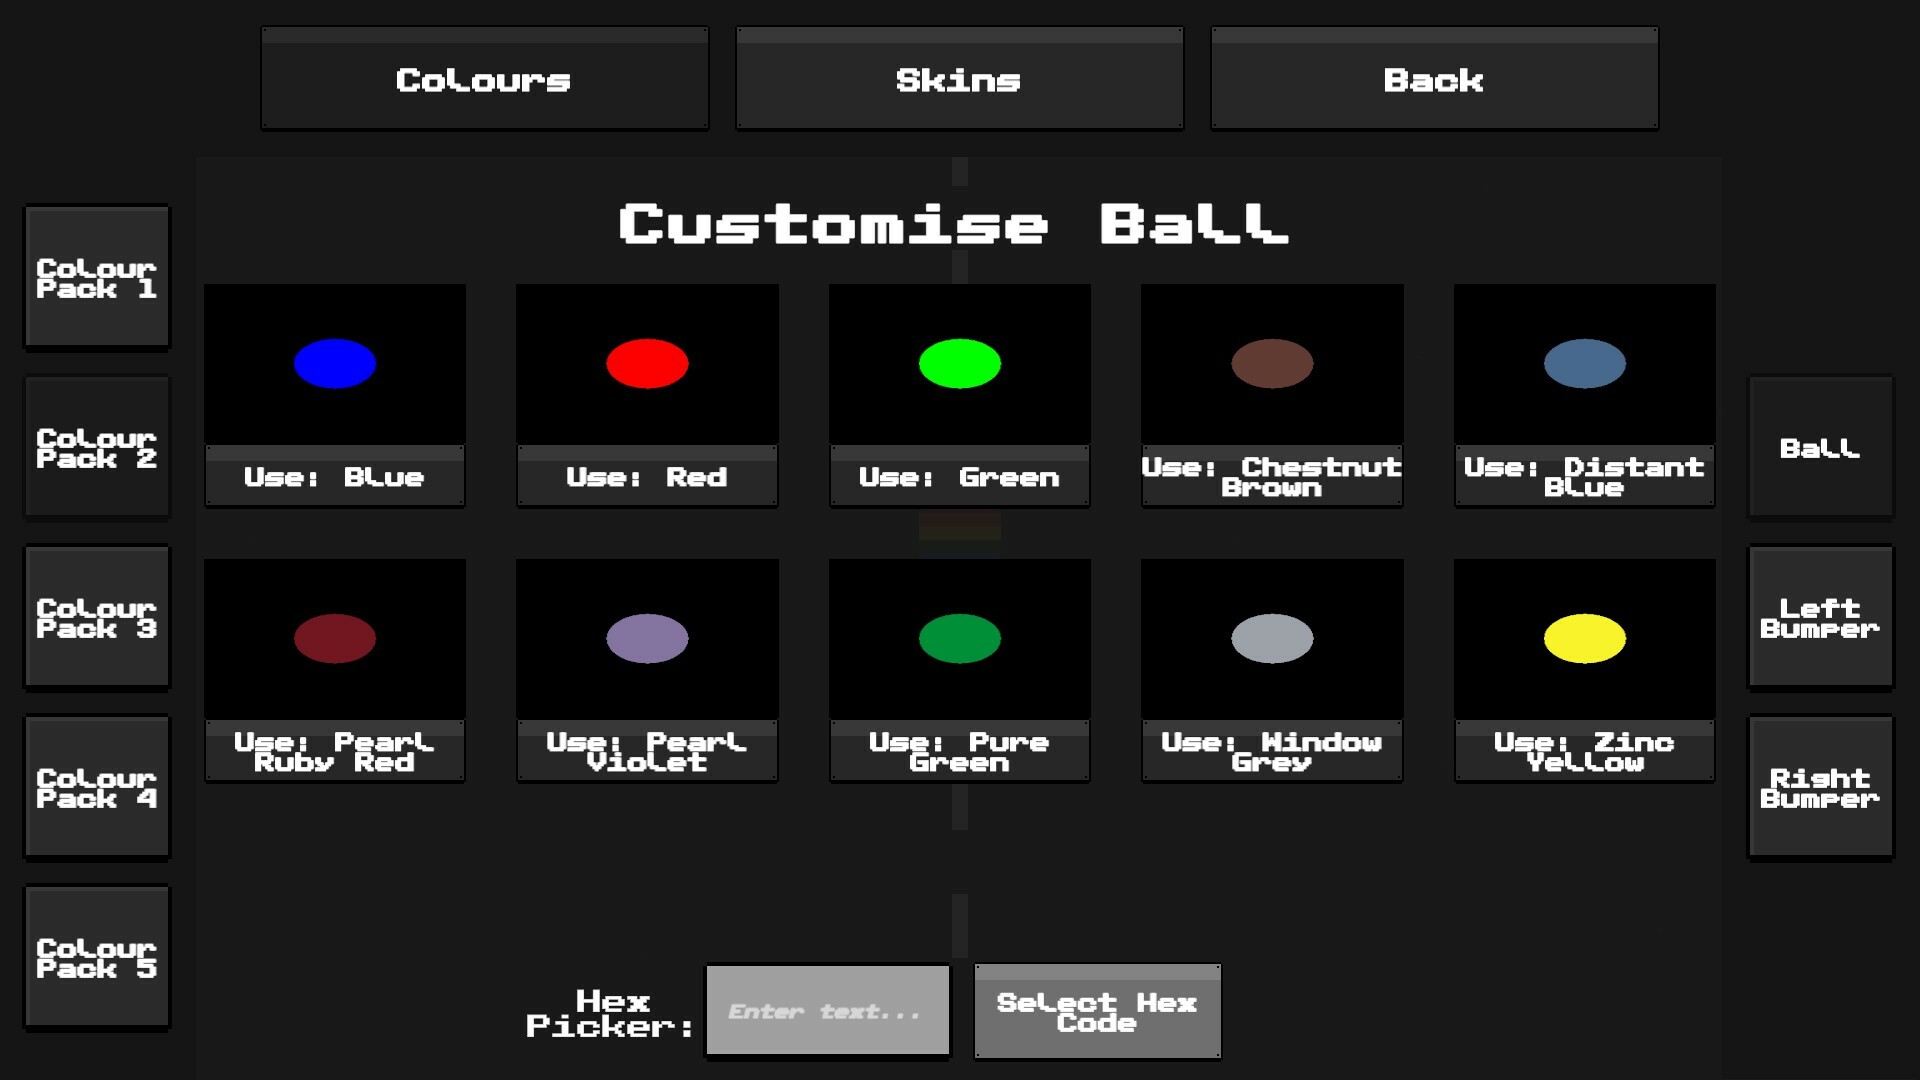 Table Ball - Colour Pack 1 Featured Screenshot #1